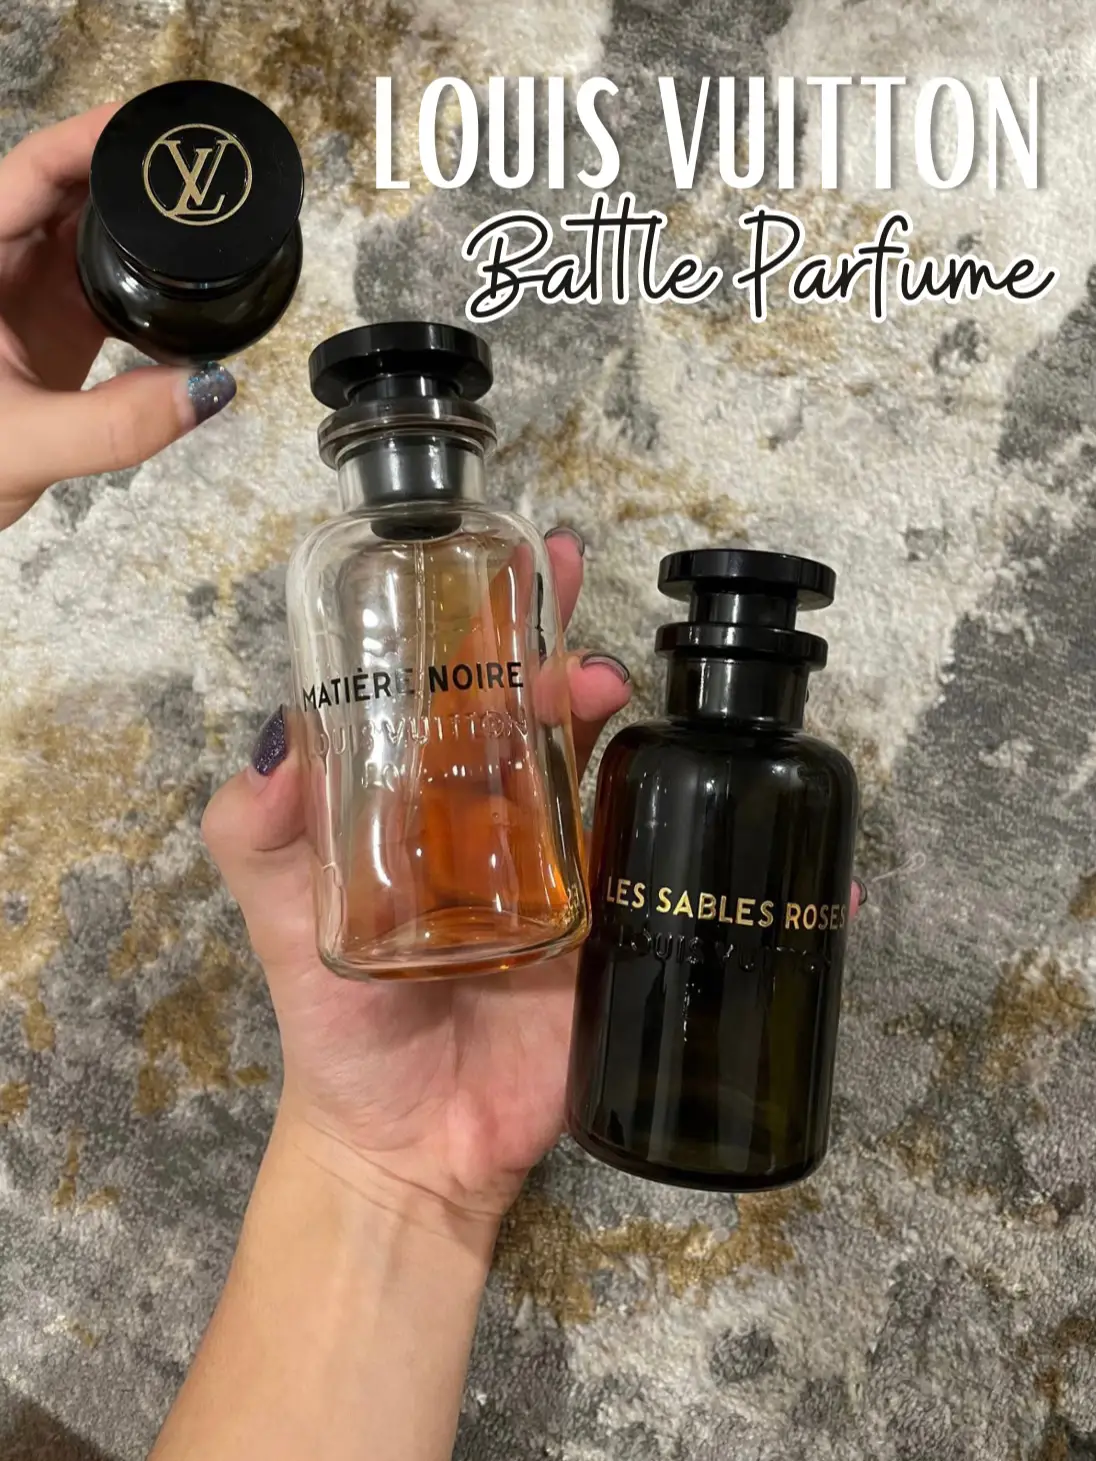 Unisex Perfume Les Sables Roses for Christmas